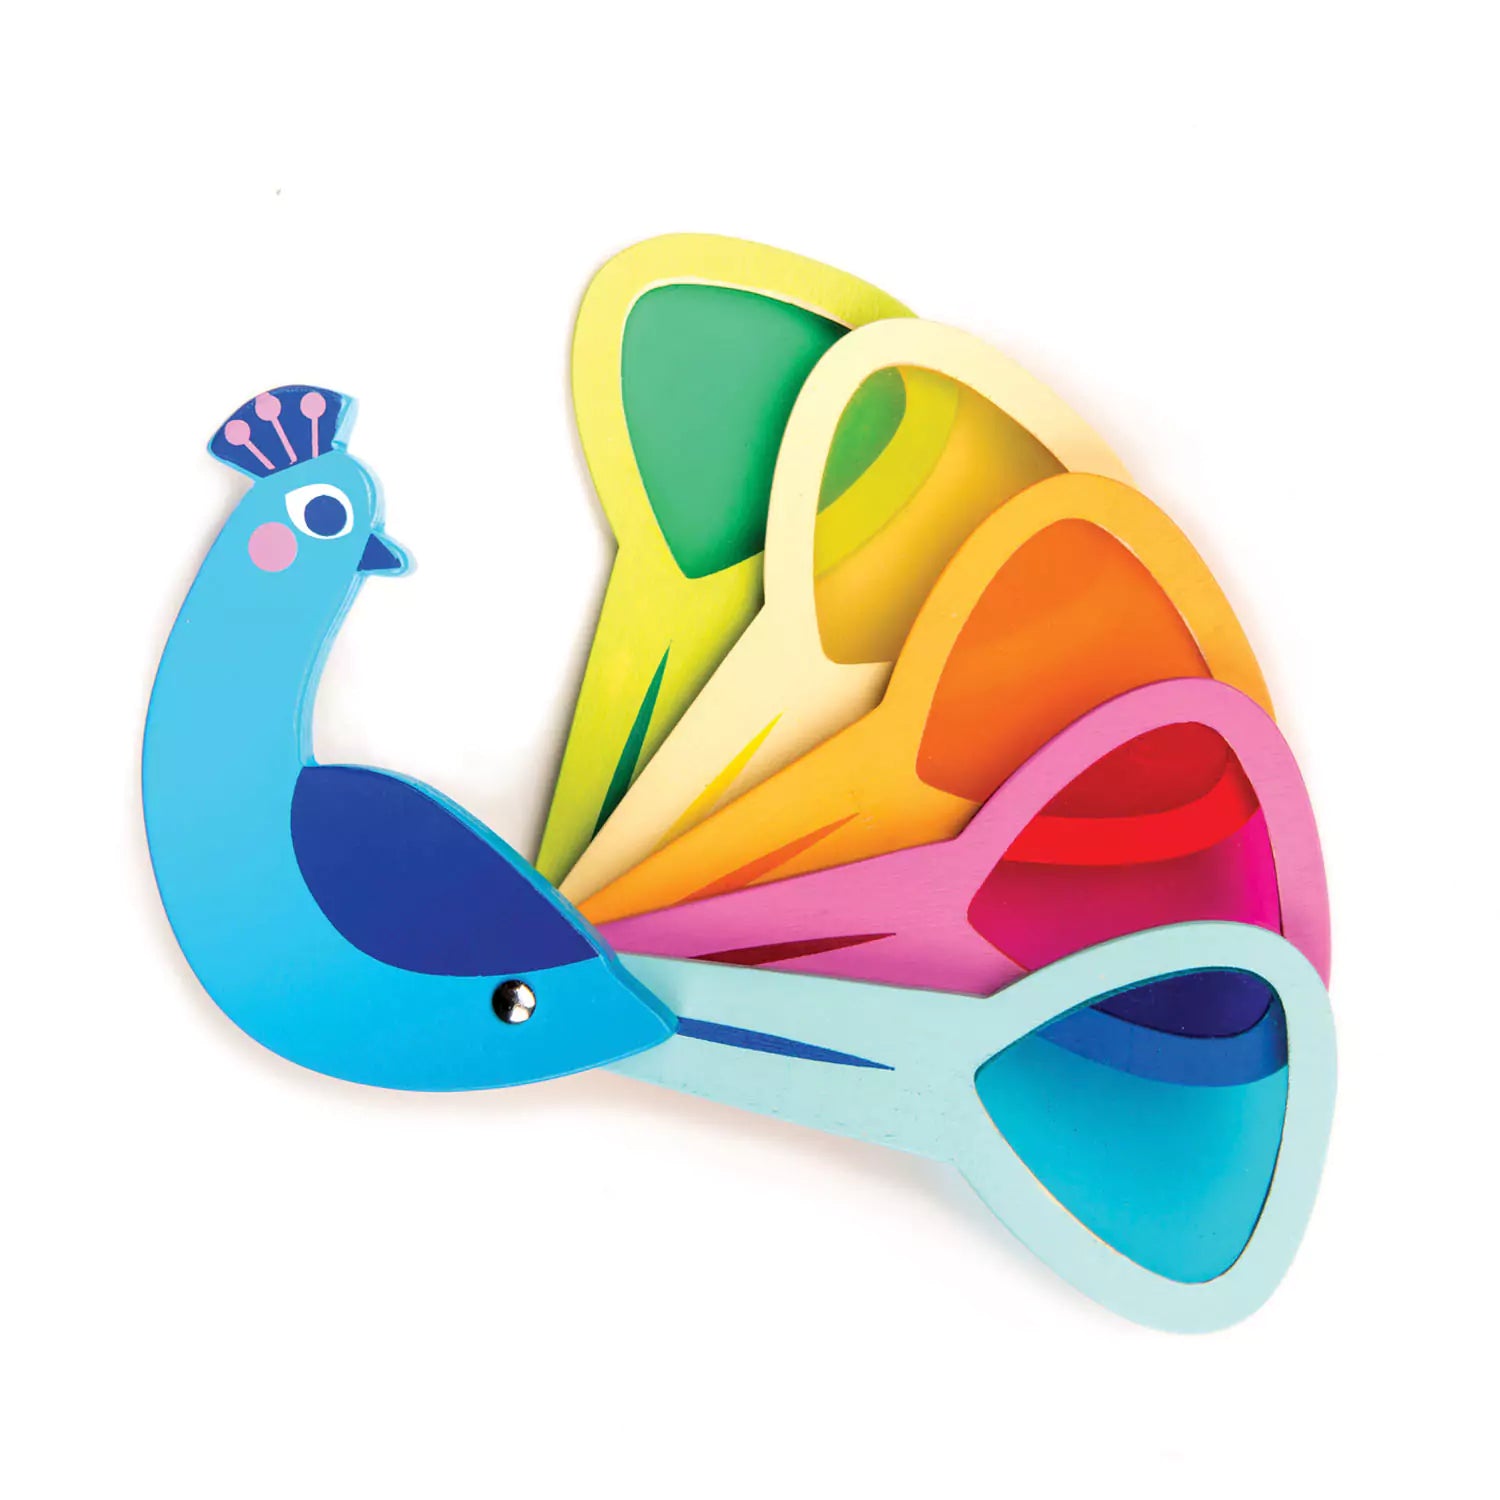 An image of Kids Education Toy - Wooden Toys - Peacock | Tender Leaf